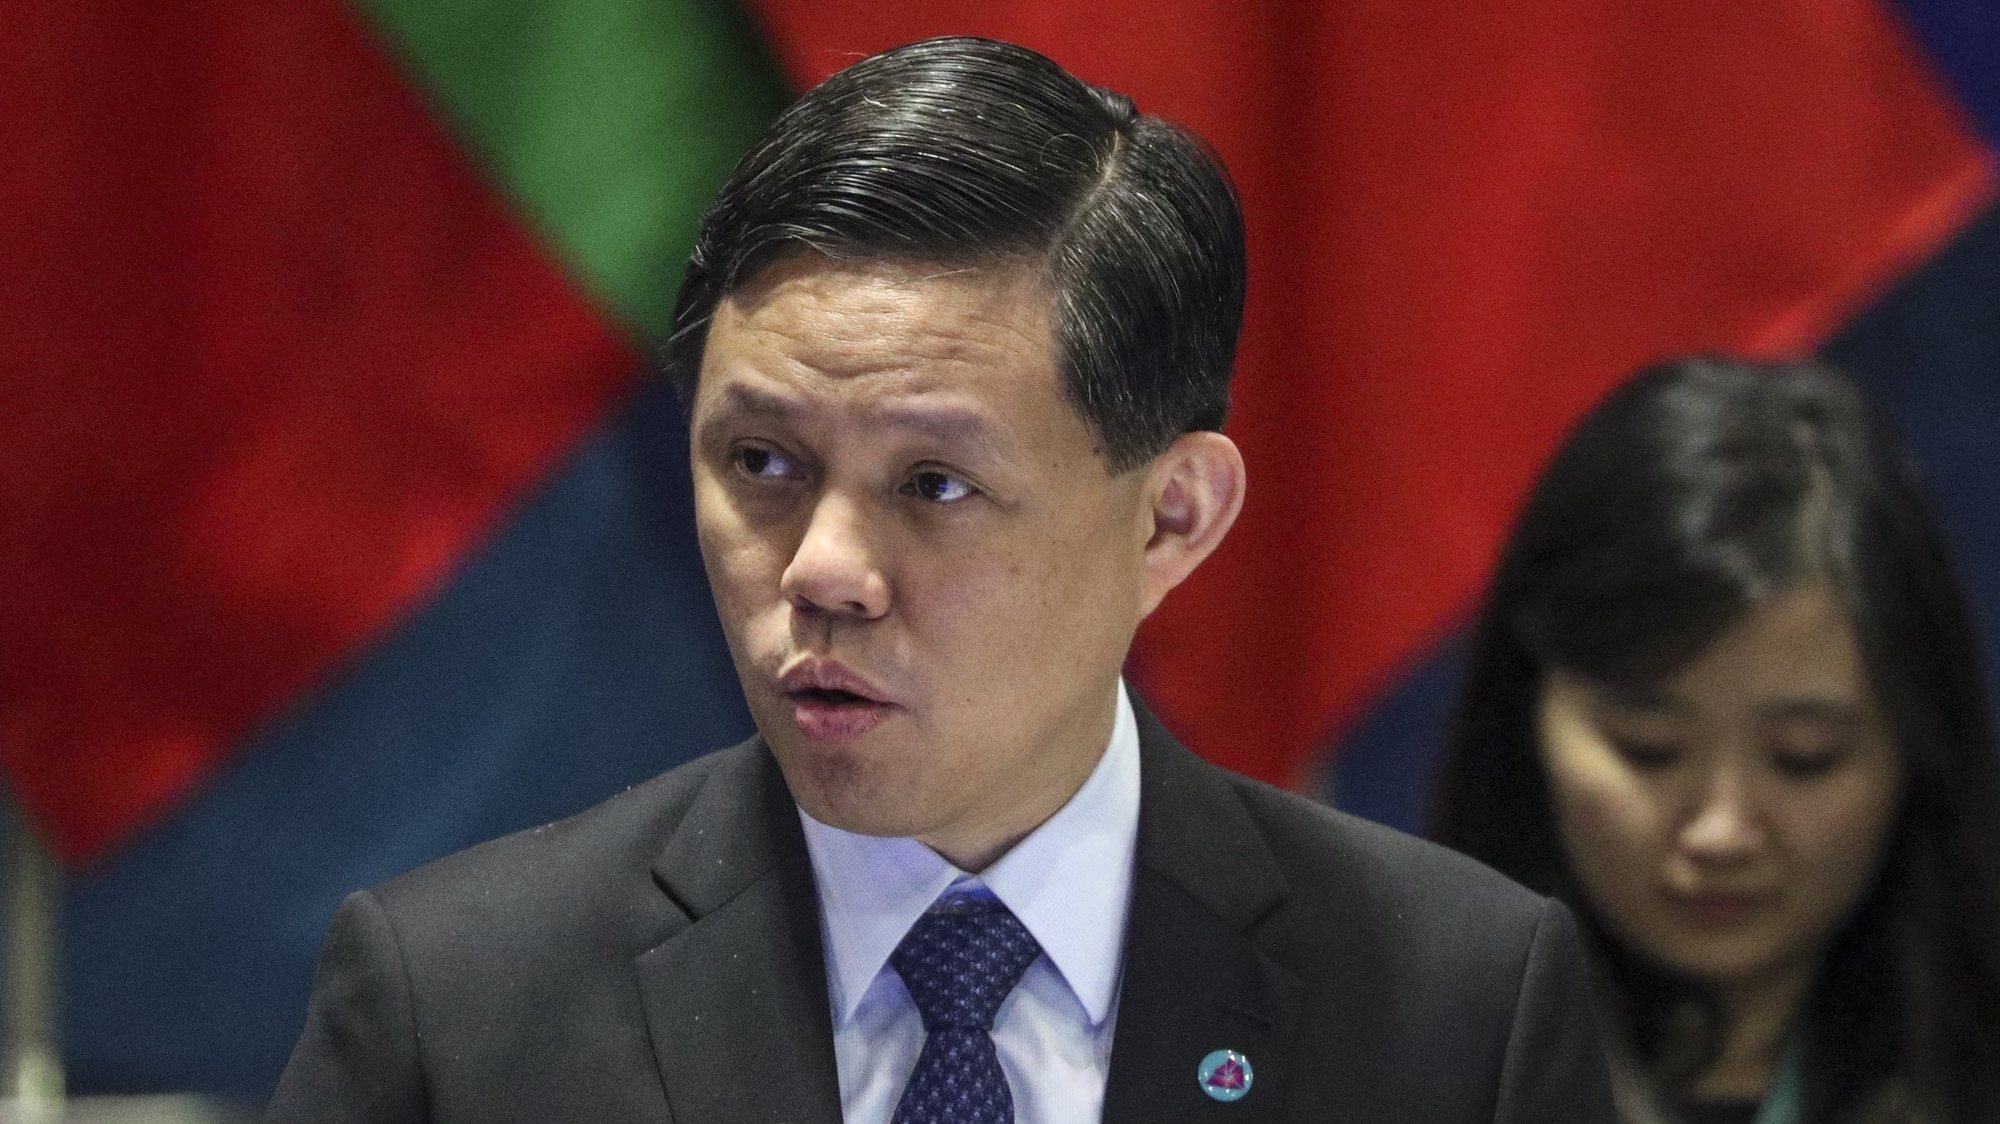 epa07160182 Singapore Minister for Trade and Industry Chan Chun Sing gestures during the 17th ASEAN Economic Community Council Meeting at the 33rd Association of Southeast Asian Nations (ASEAN) Summit and Related meetings in Singapore, 12 November 2018. Singapore is hosting the 33rd ASEAN Summit and Related Meetings under the theme &#039;Resilient and Innovative&#039; this year.  EPA/WALLACE WOON